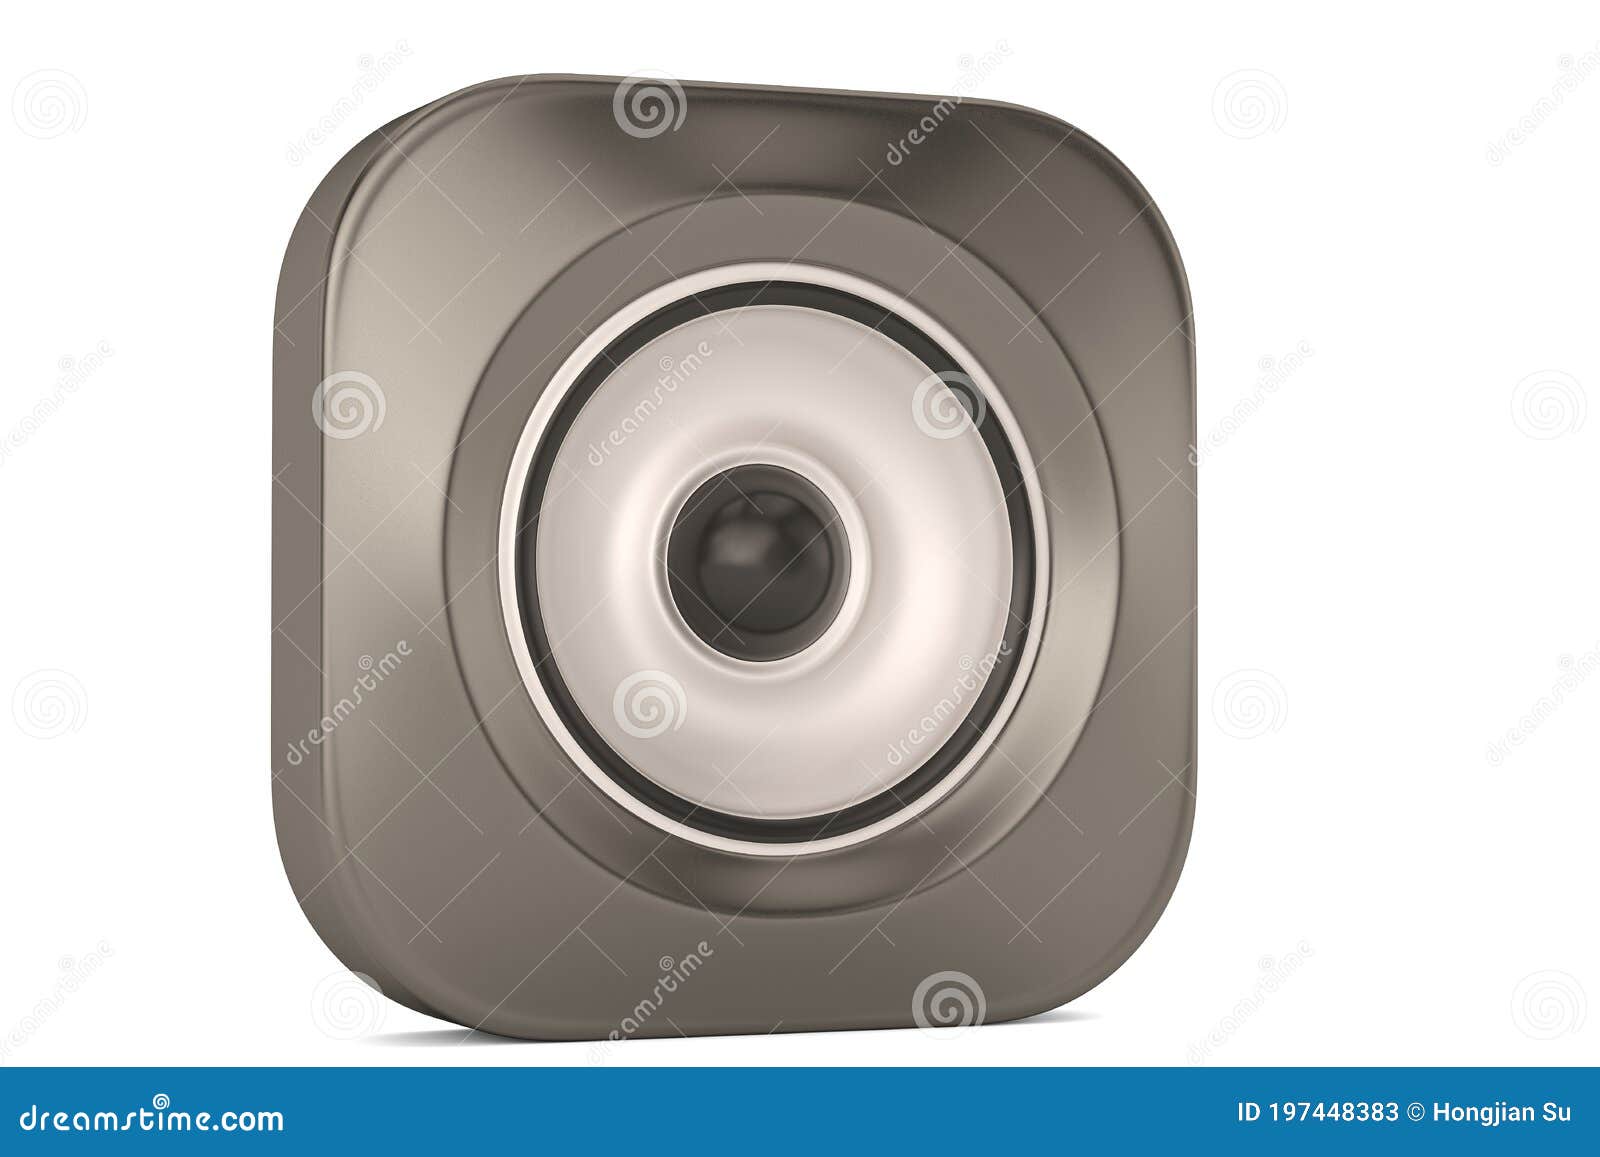 camera 3d icon    on white background, 3d render. 3d 